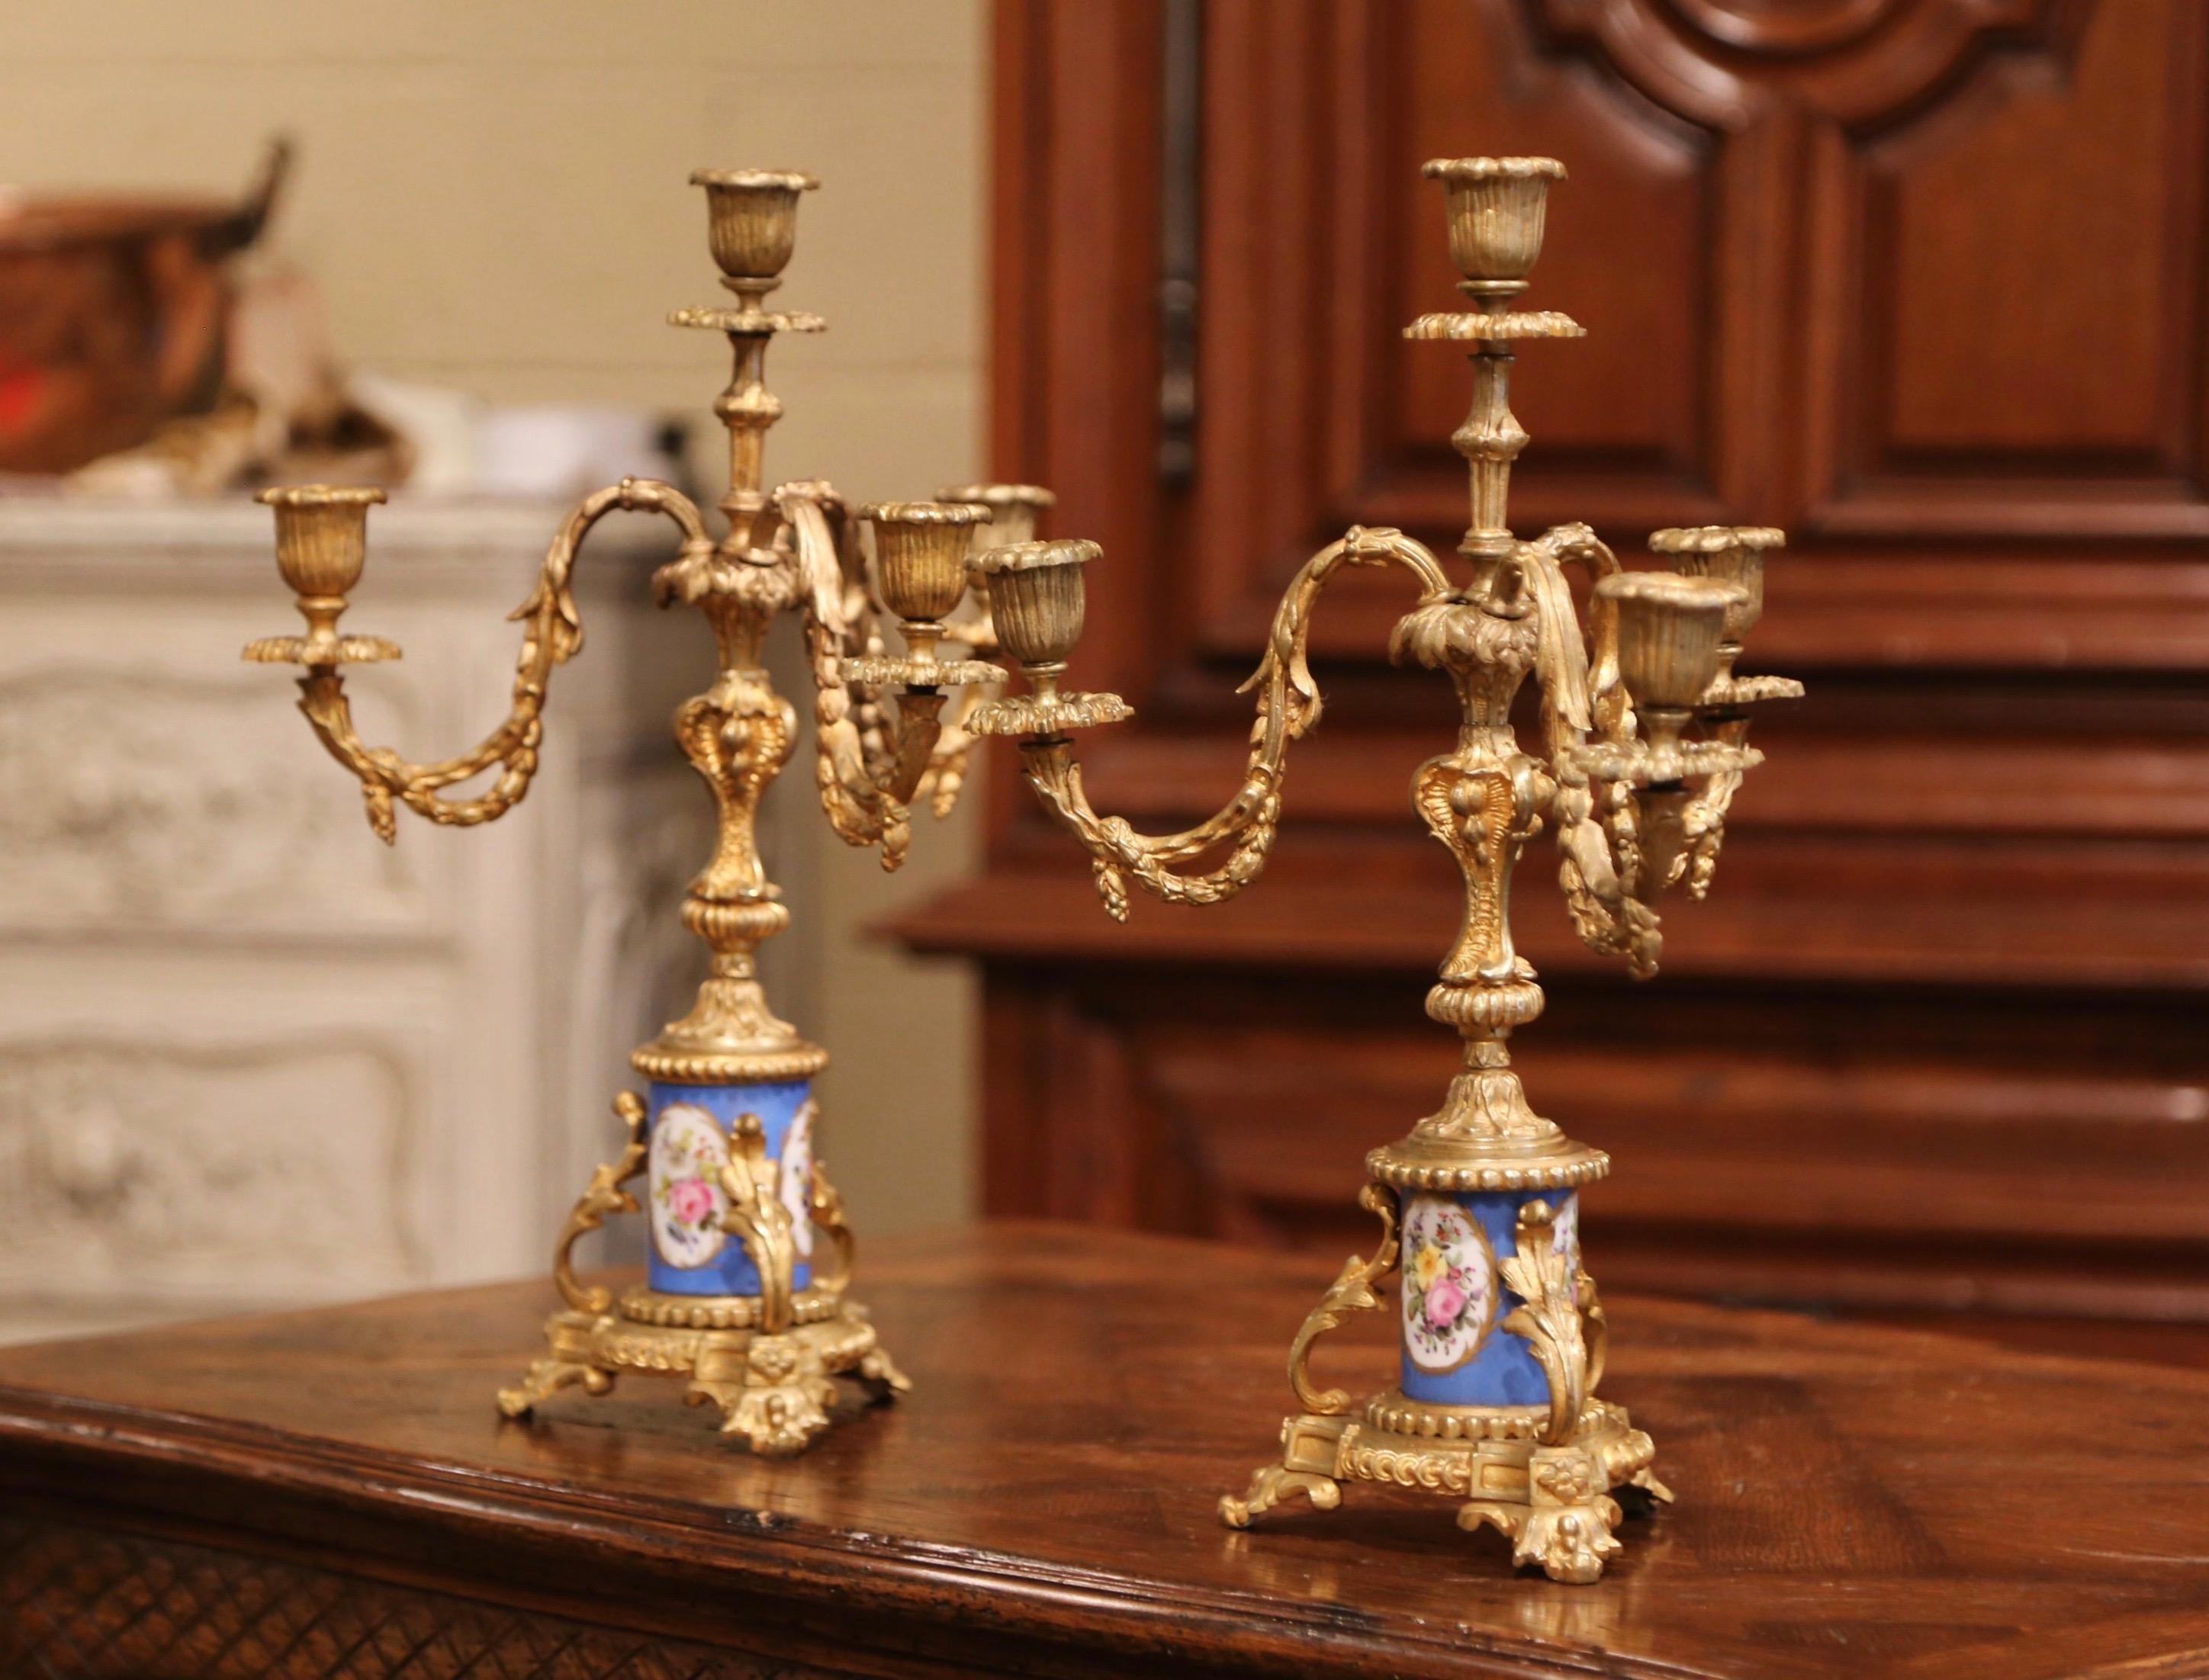 Decorate a dining room table or a mantel with this elegant pair of antique bronze candleholders. Crafted in France circa 1870, each candelabra stands on a tripod base with curved feet over a colorful hand painted porcelain stem decorated with floral